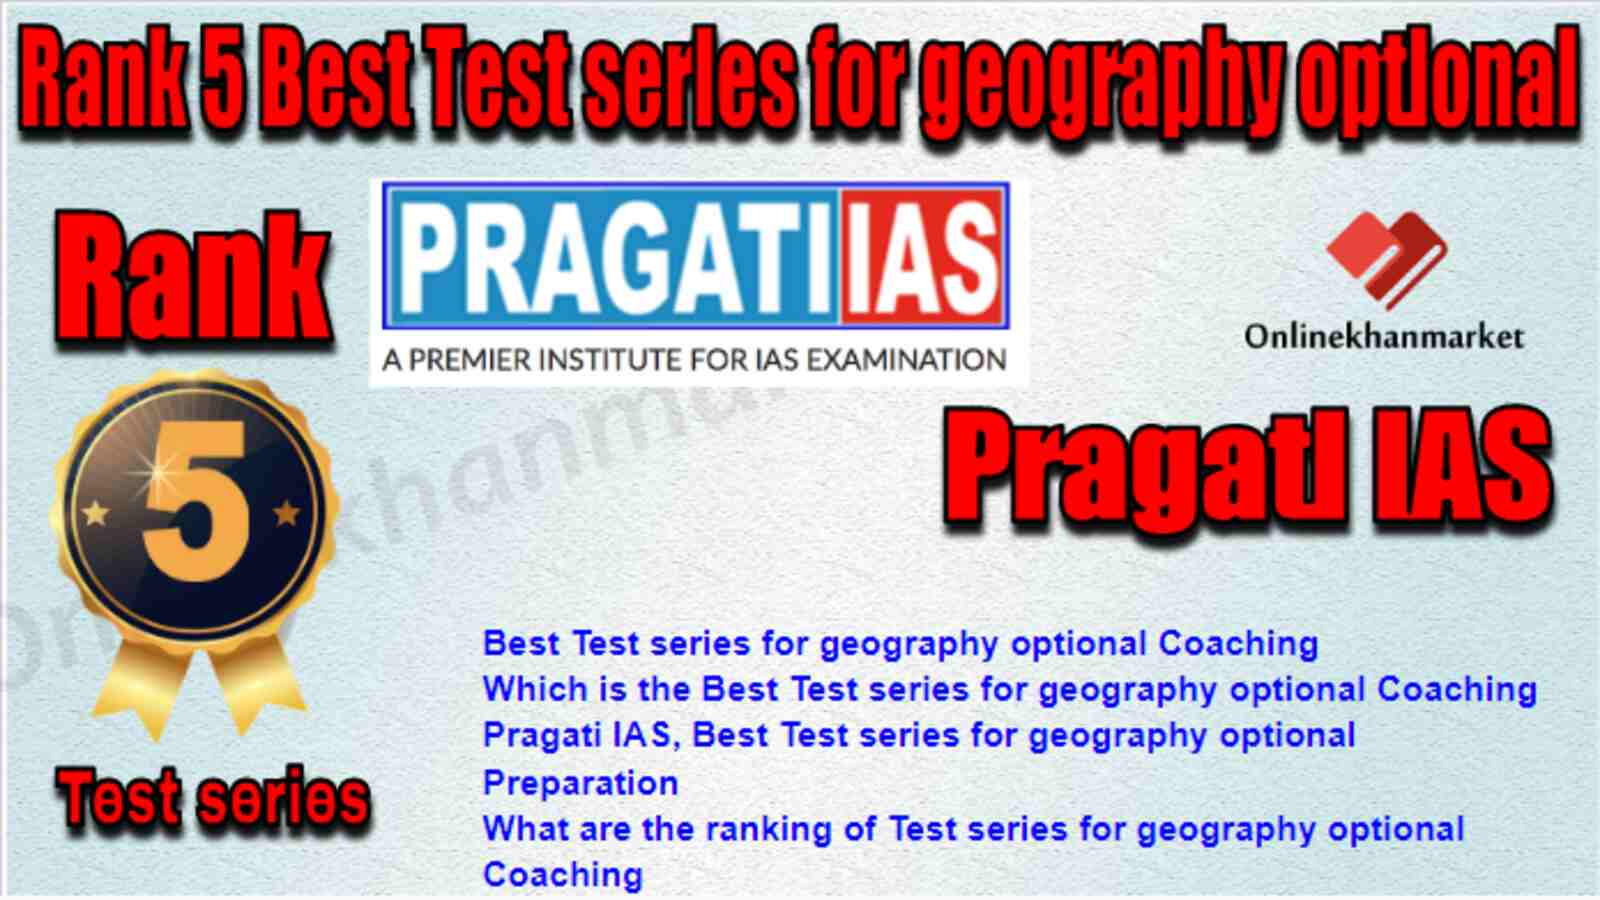 Rank 5 Best Test series for geography optional